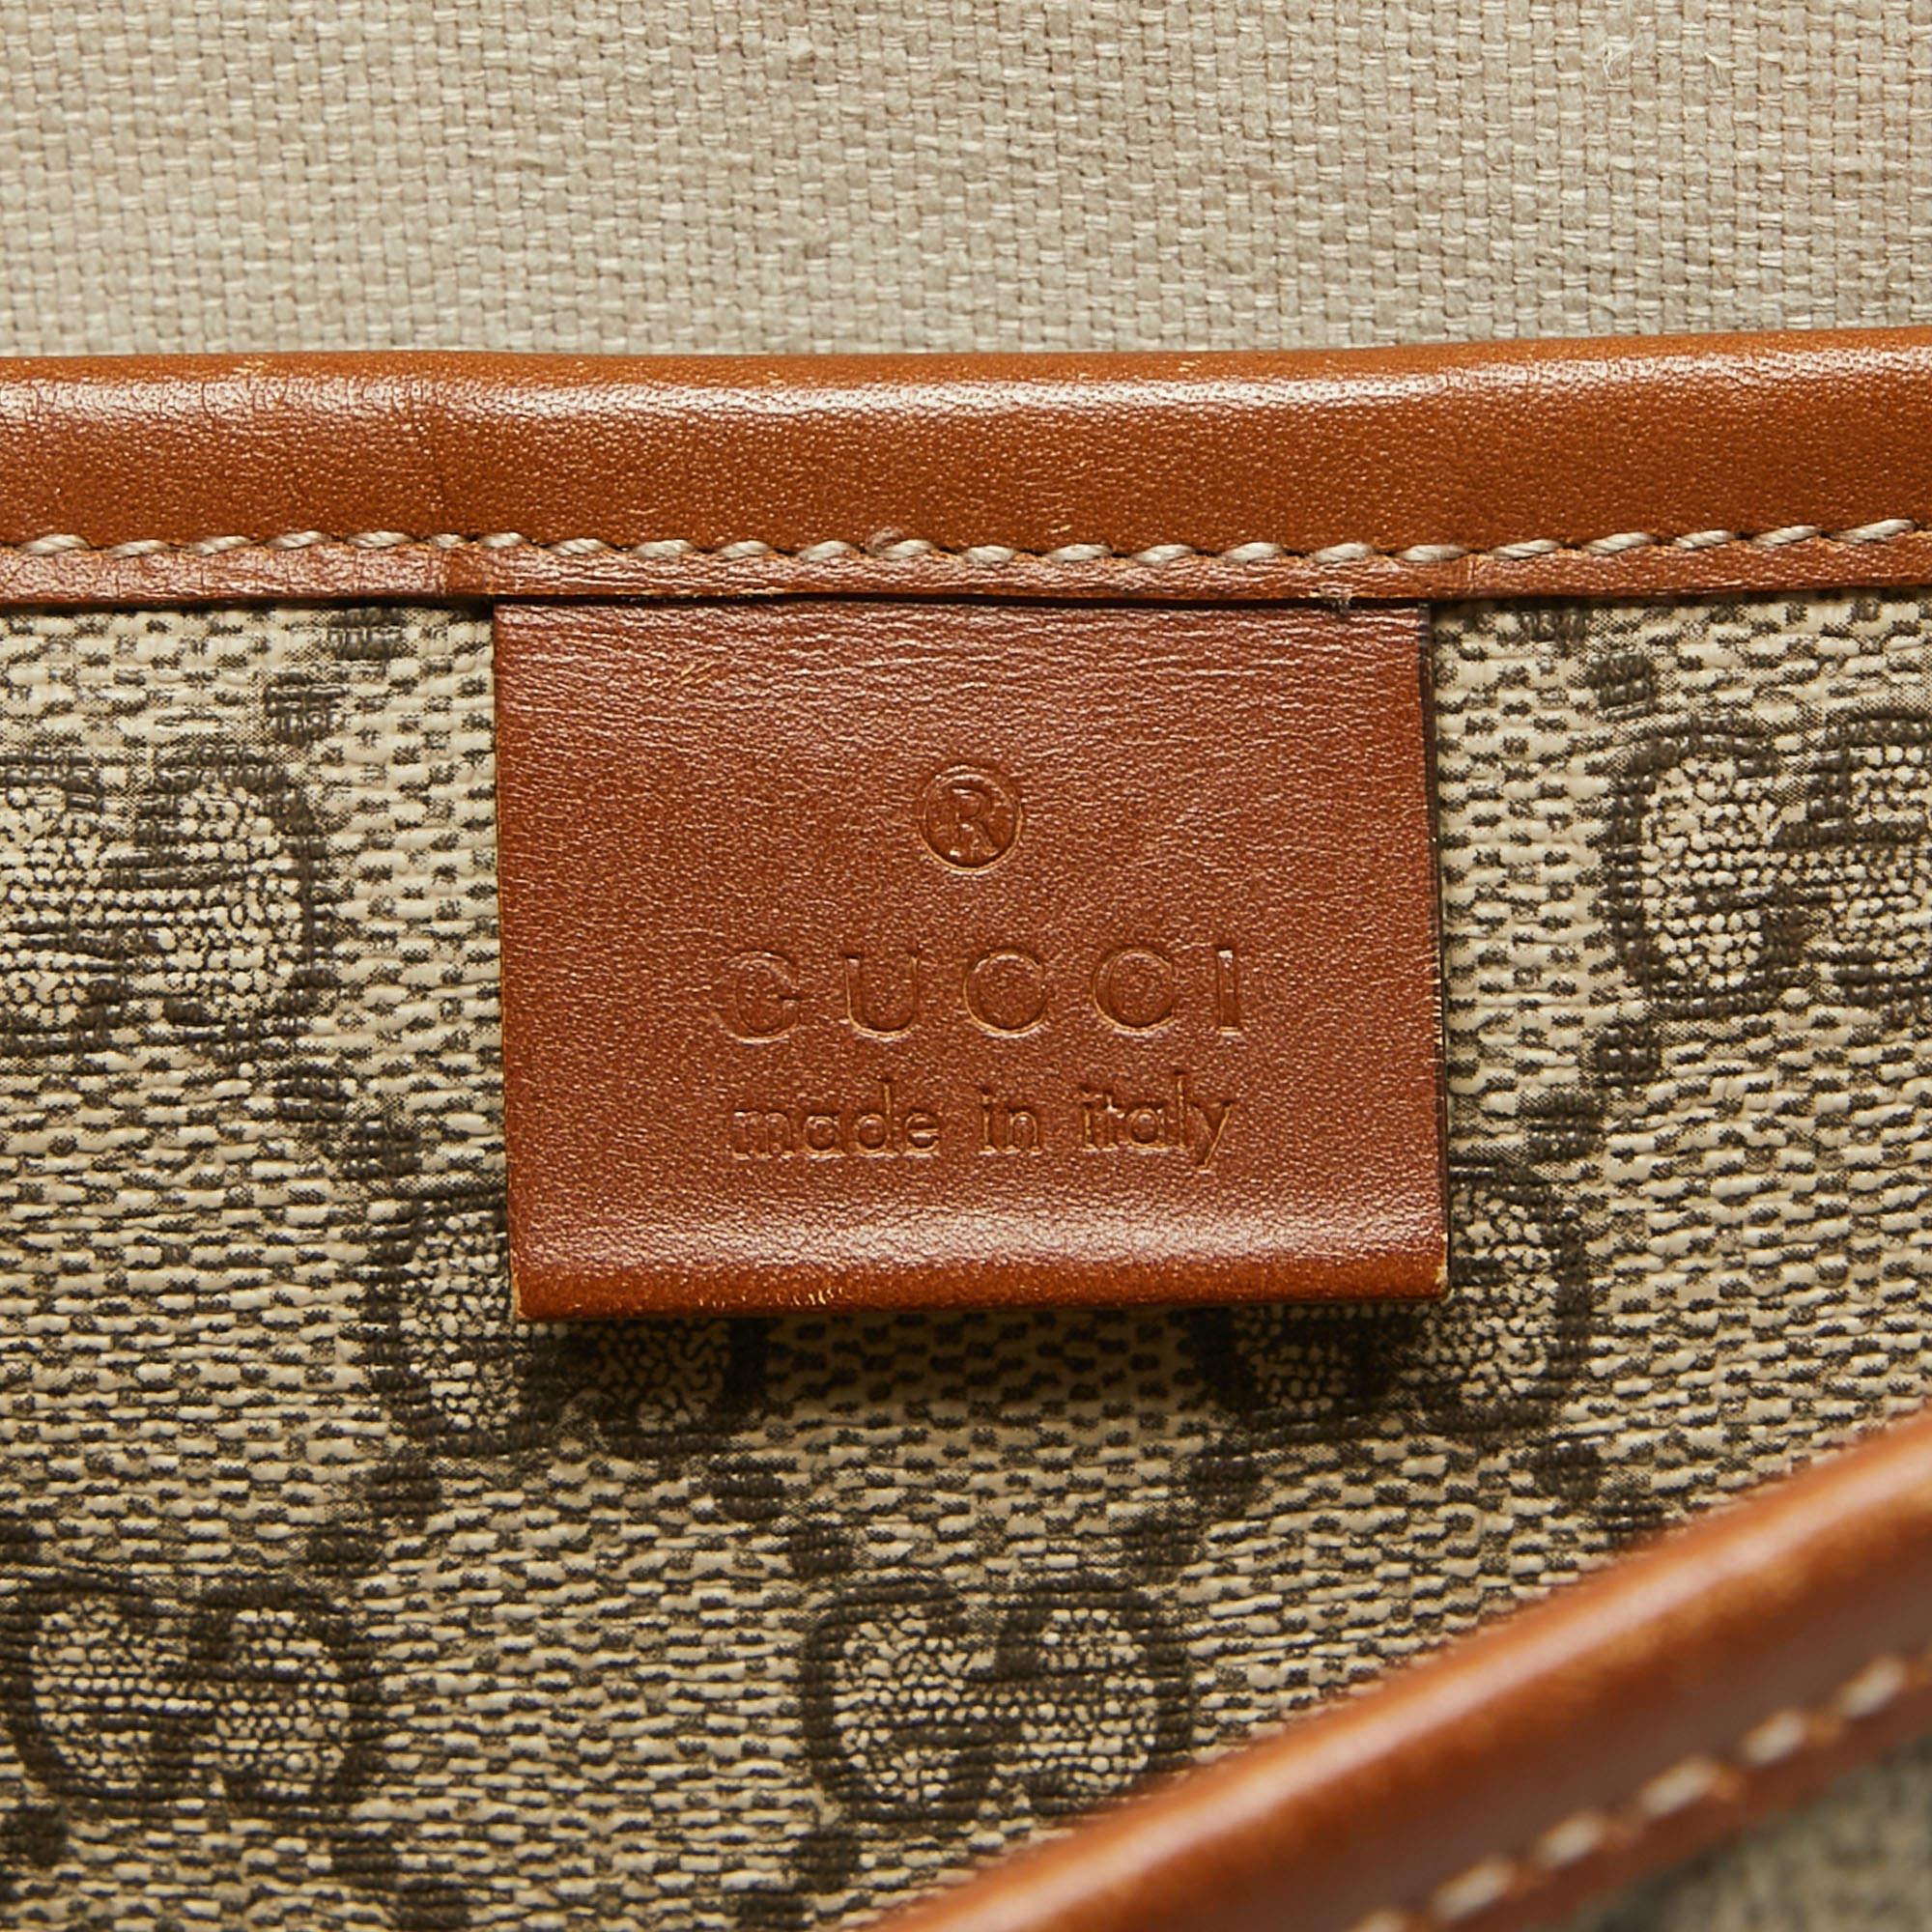 Gucci Beige/Brown GG Supreme Canvas And Leather Messenger Bag For Sale 24